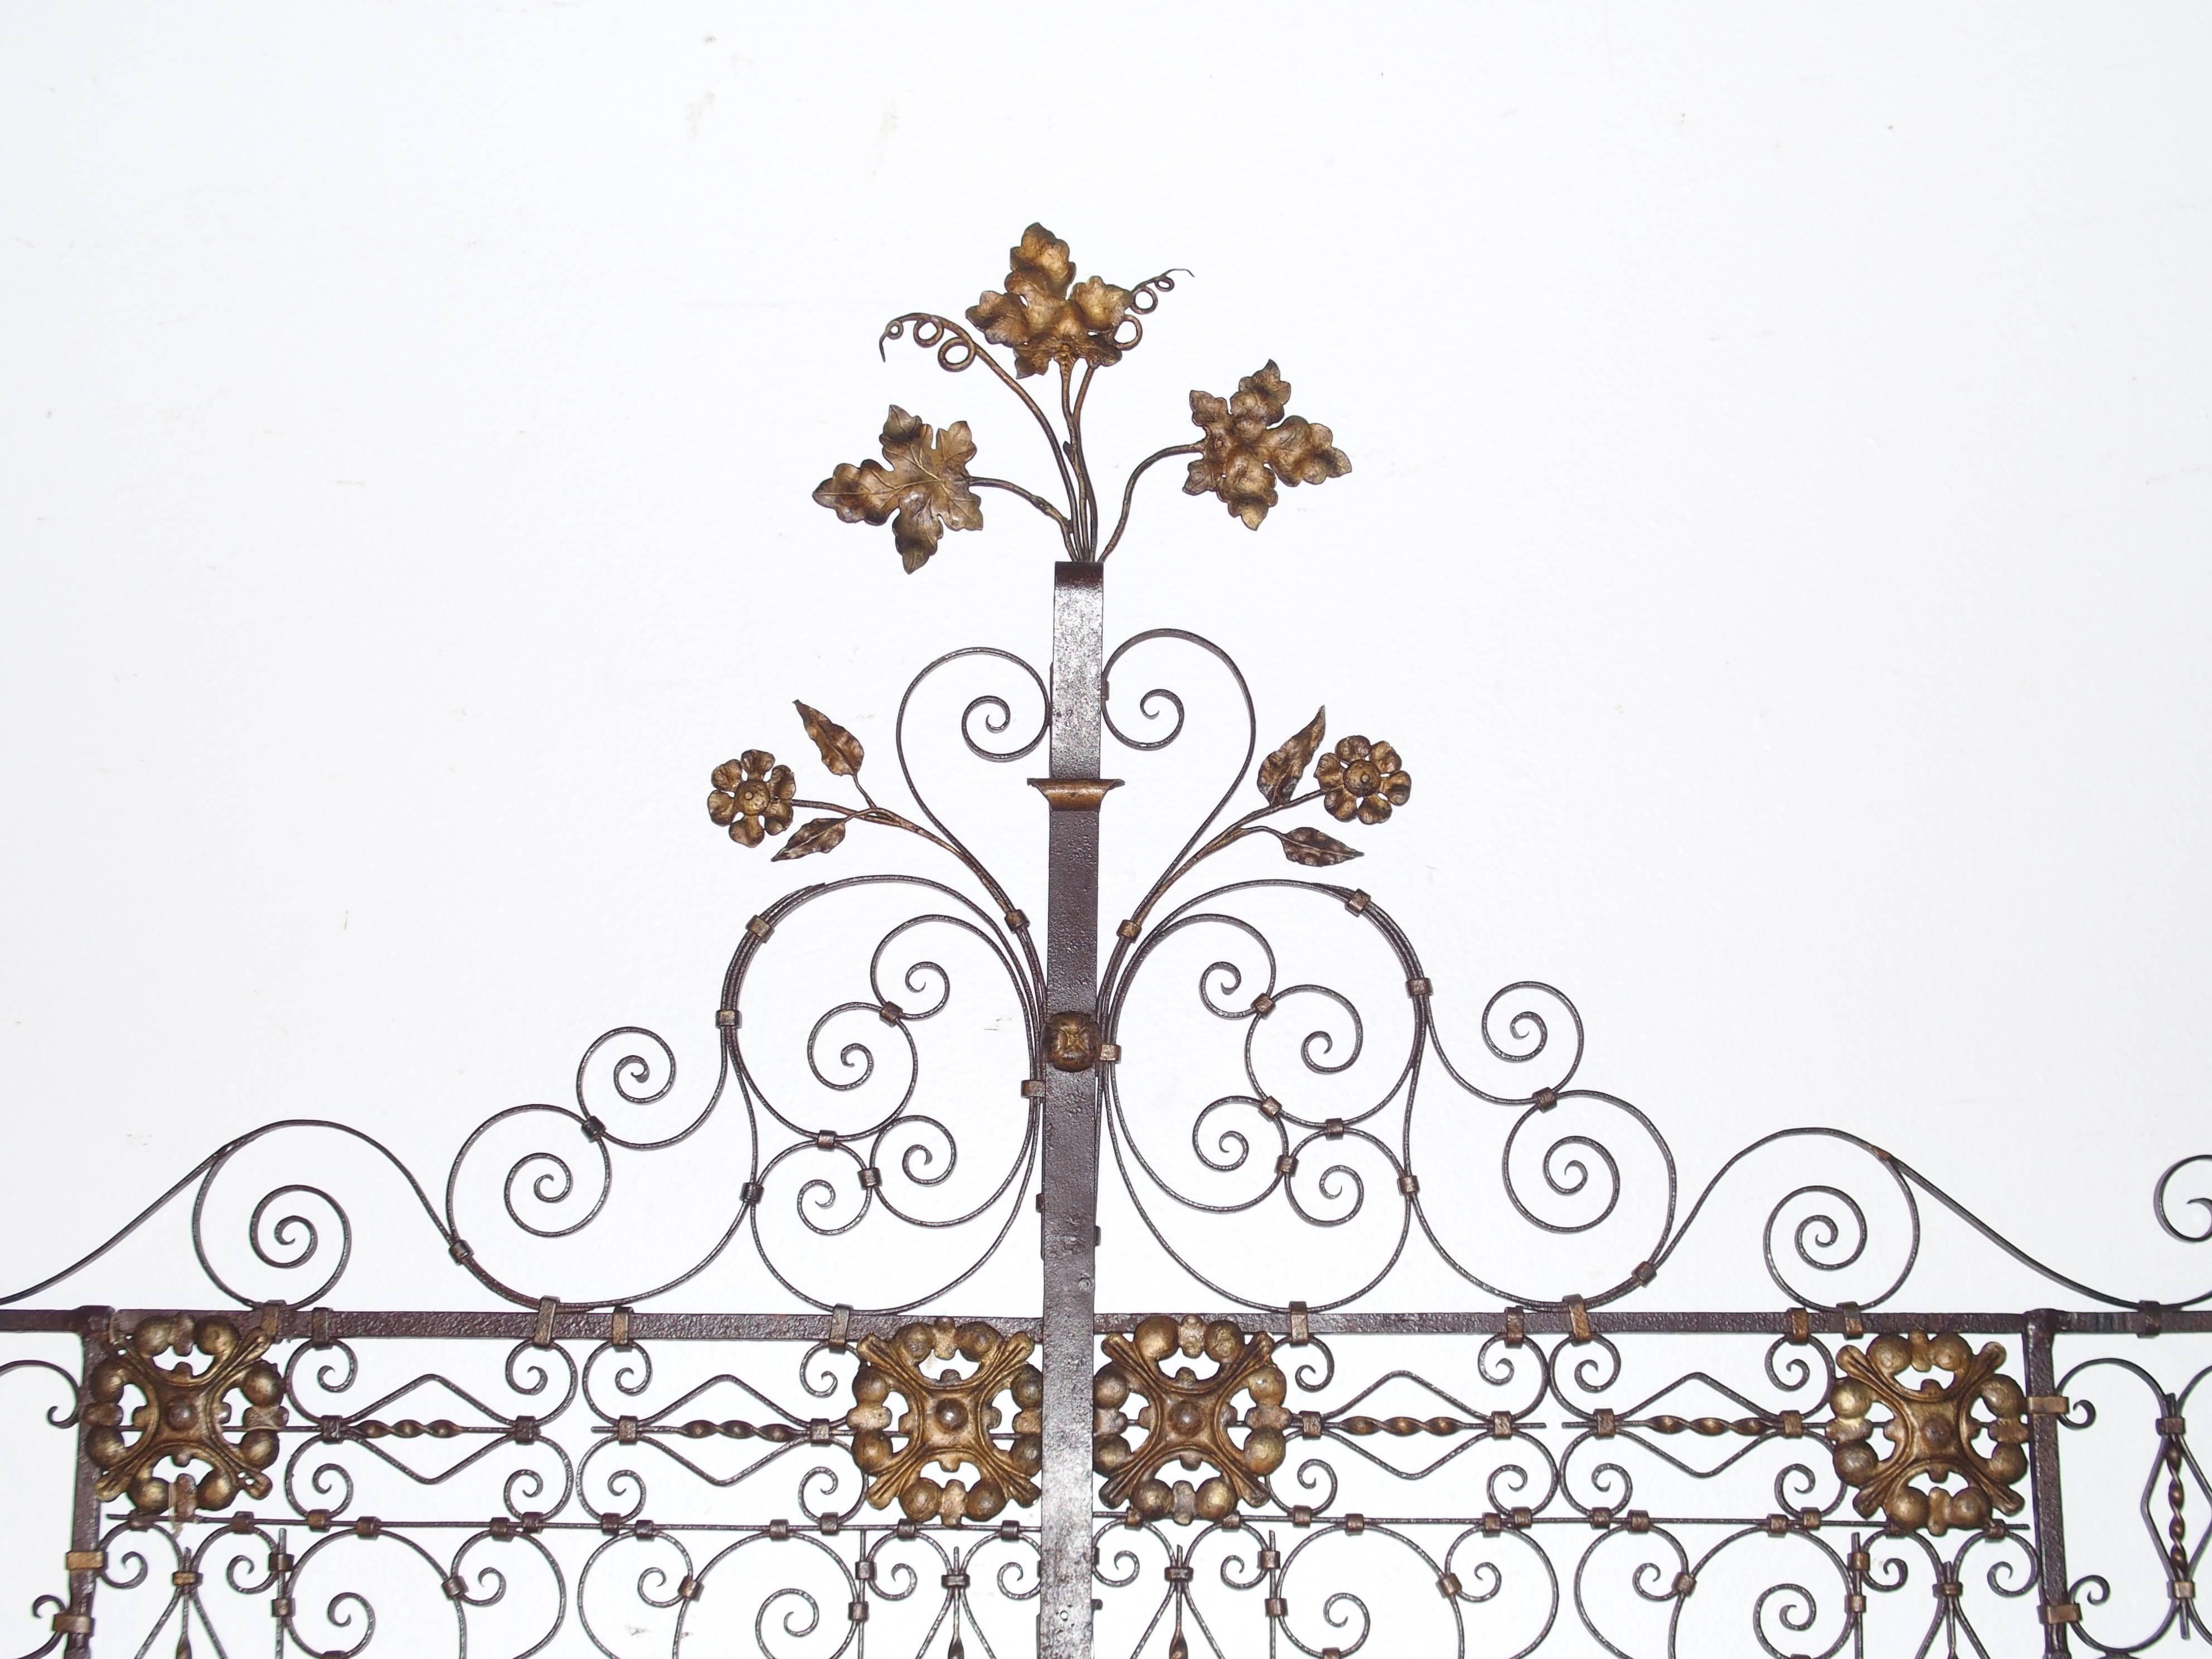 These stunning forged iron antique gates have similarities to Viollet-le-Duc’s Notre Dame gates. More specifically, we see it in the banding together of the stems of the flowers and the tall central ornaments above the gates. Therefore, we can say